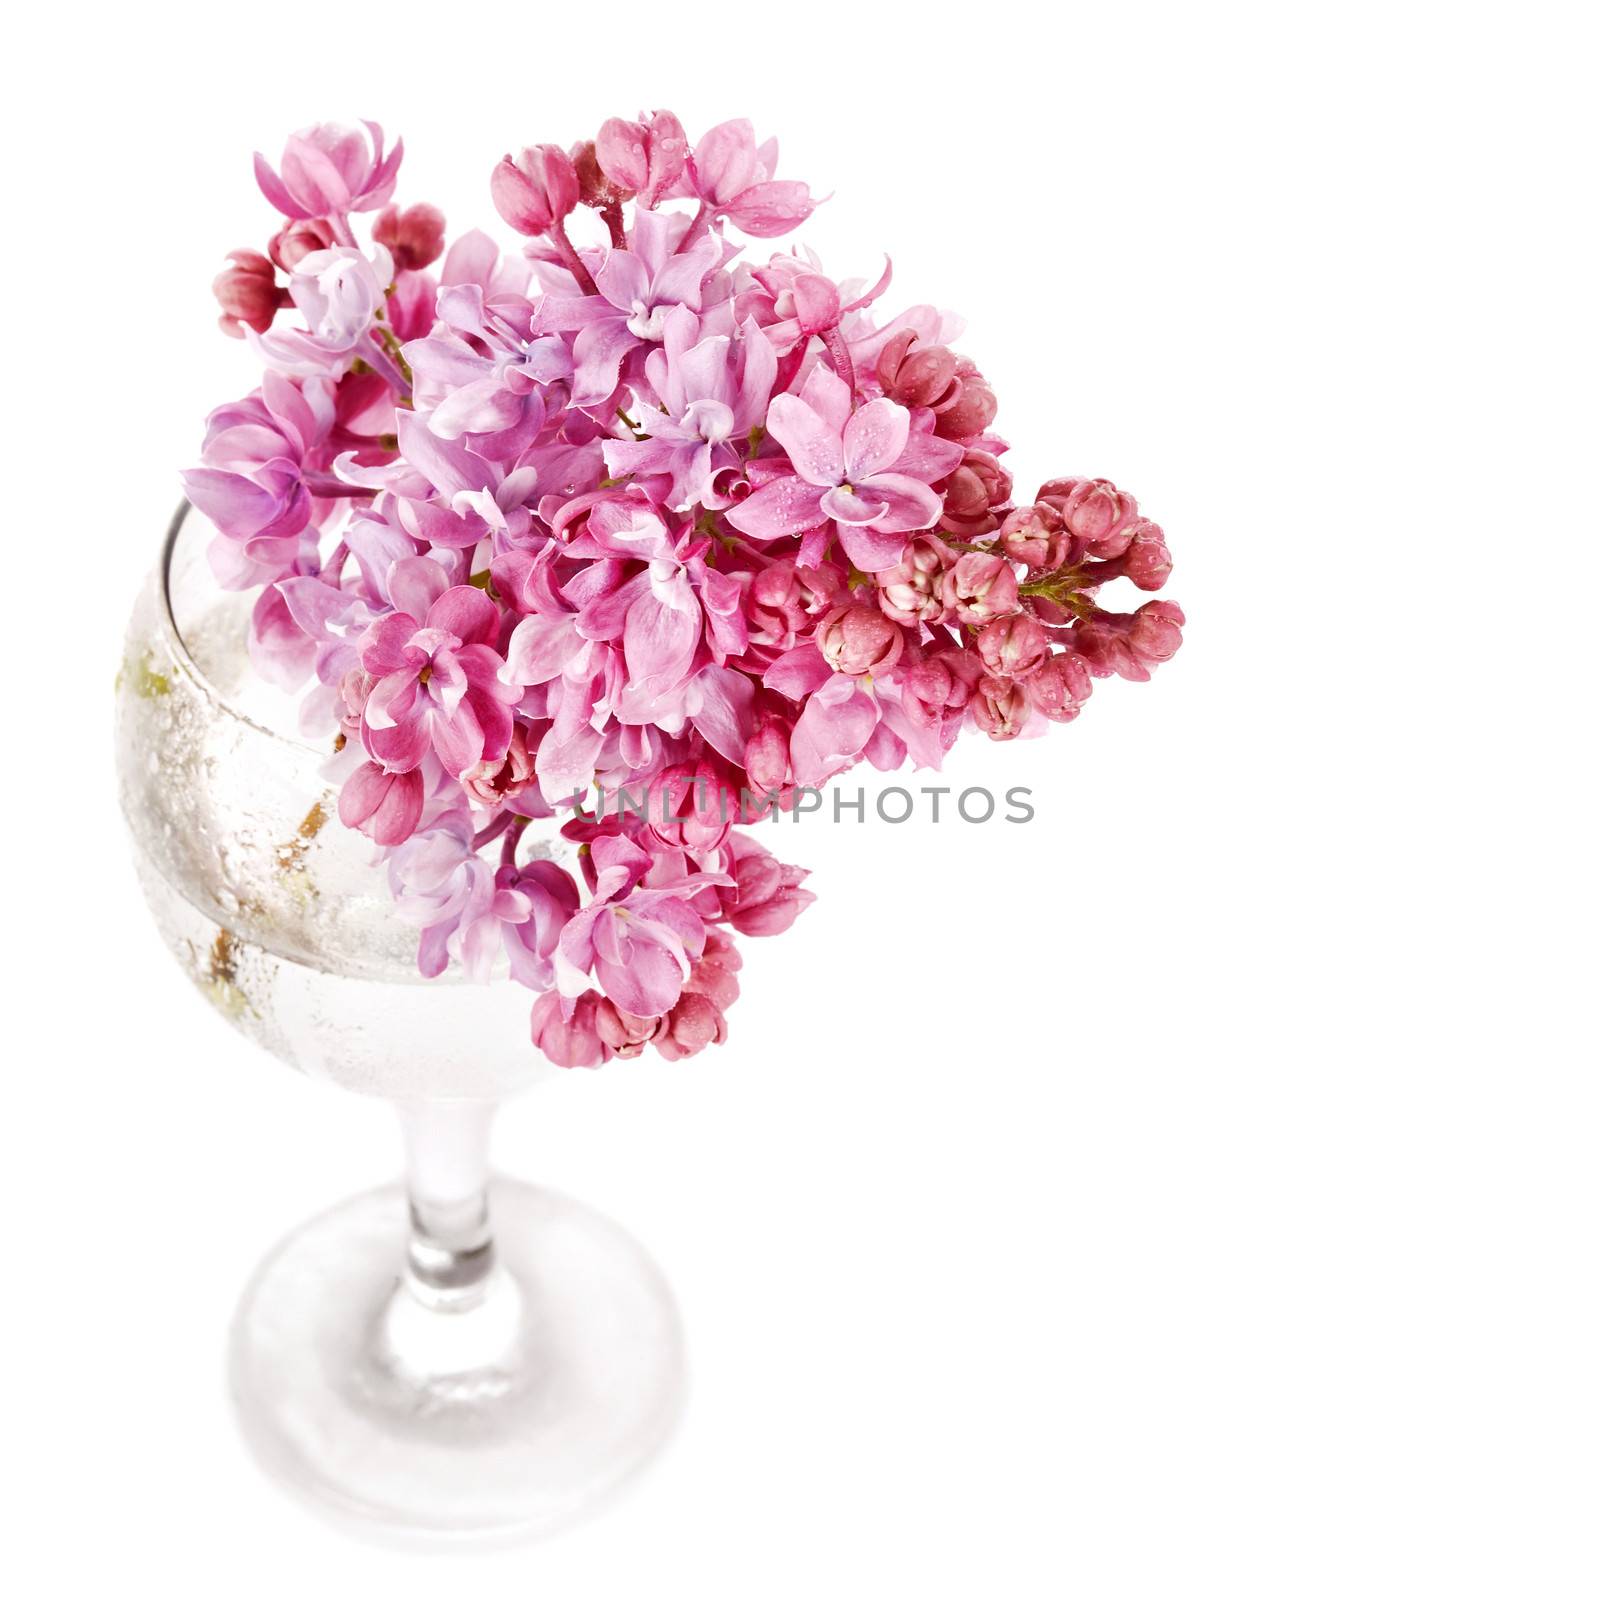 Lilac branch in a glass. Lilac flowers. Lilac bouquet.